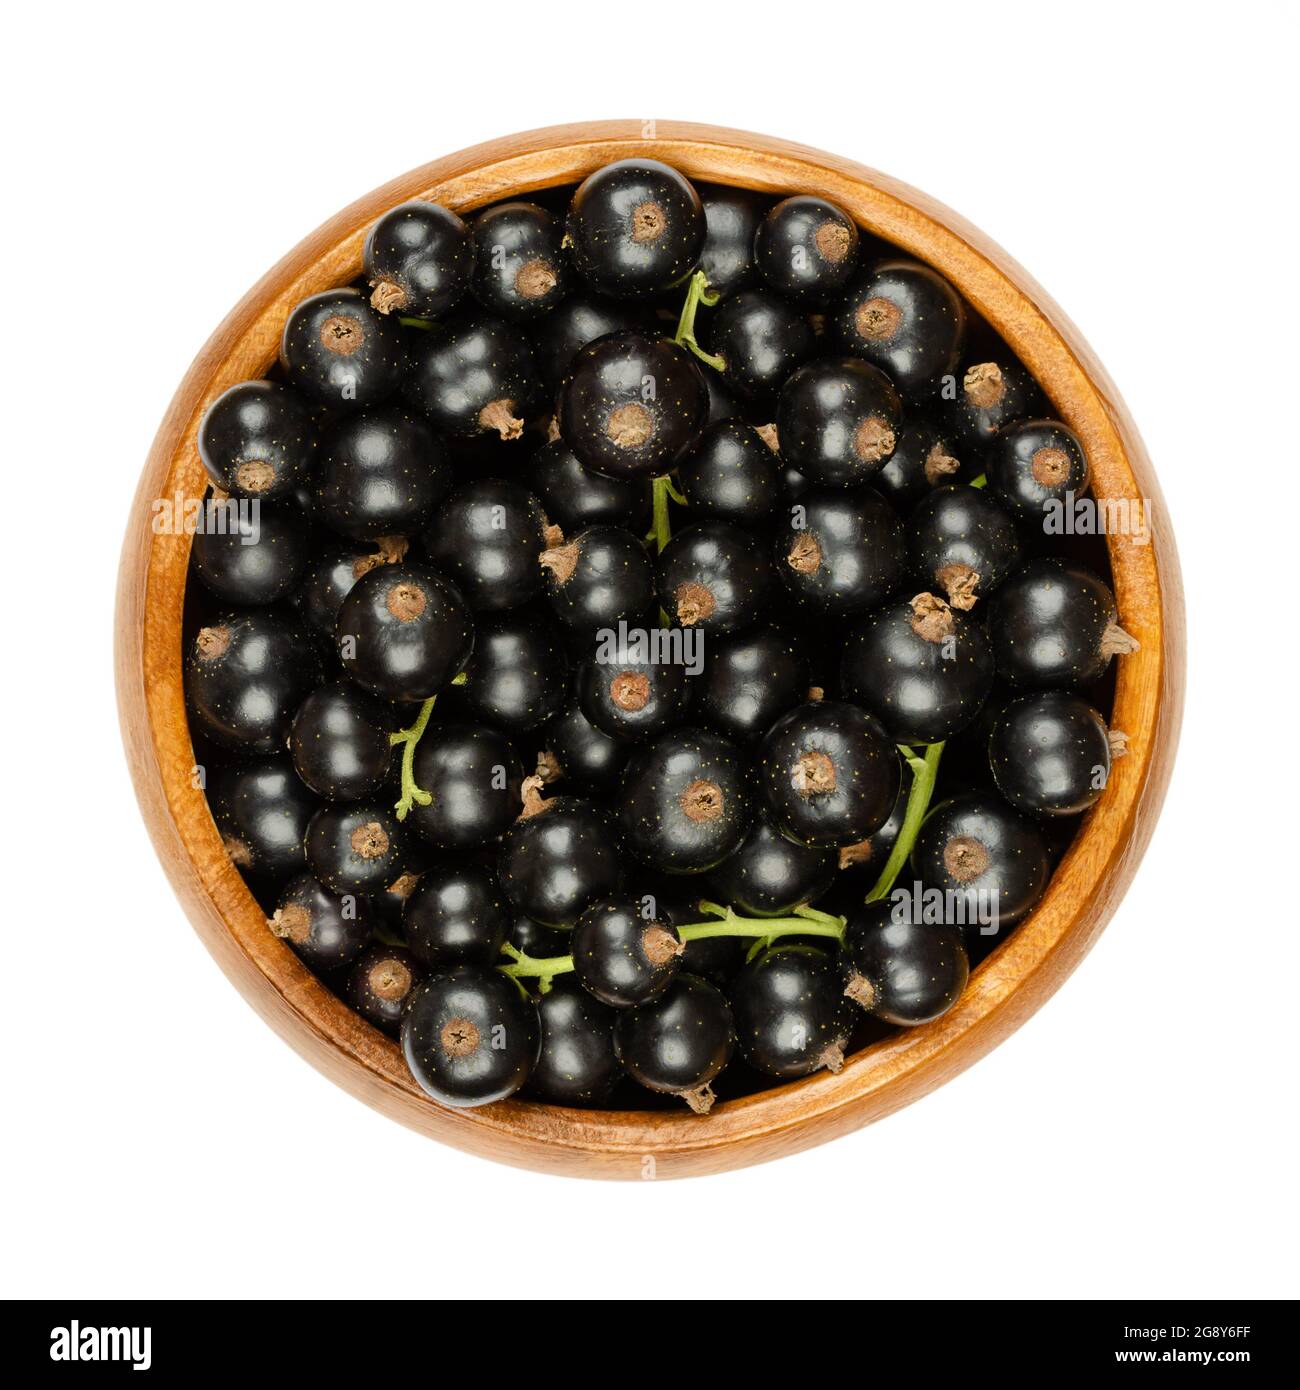 Blackcurrant berries, in a wooden bowl. Fresh, ripe black currant berries, also known as cassis, spherical edible fruits of Ribes nigrum. Stock Photo